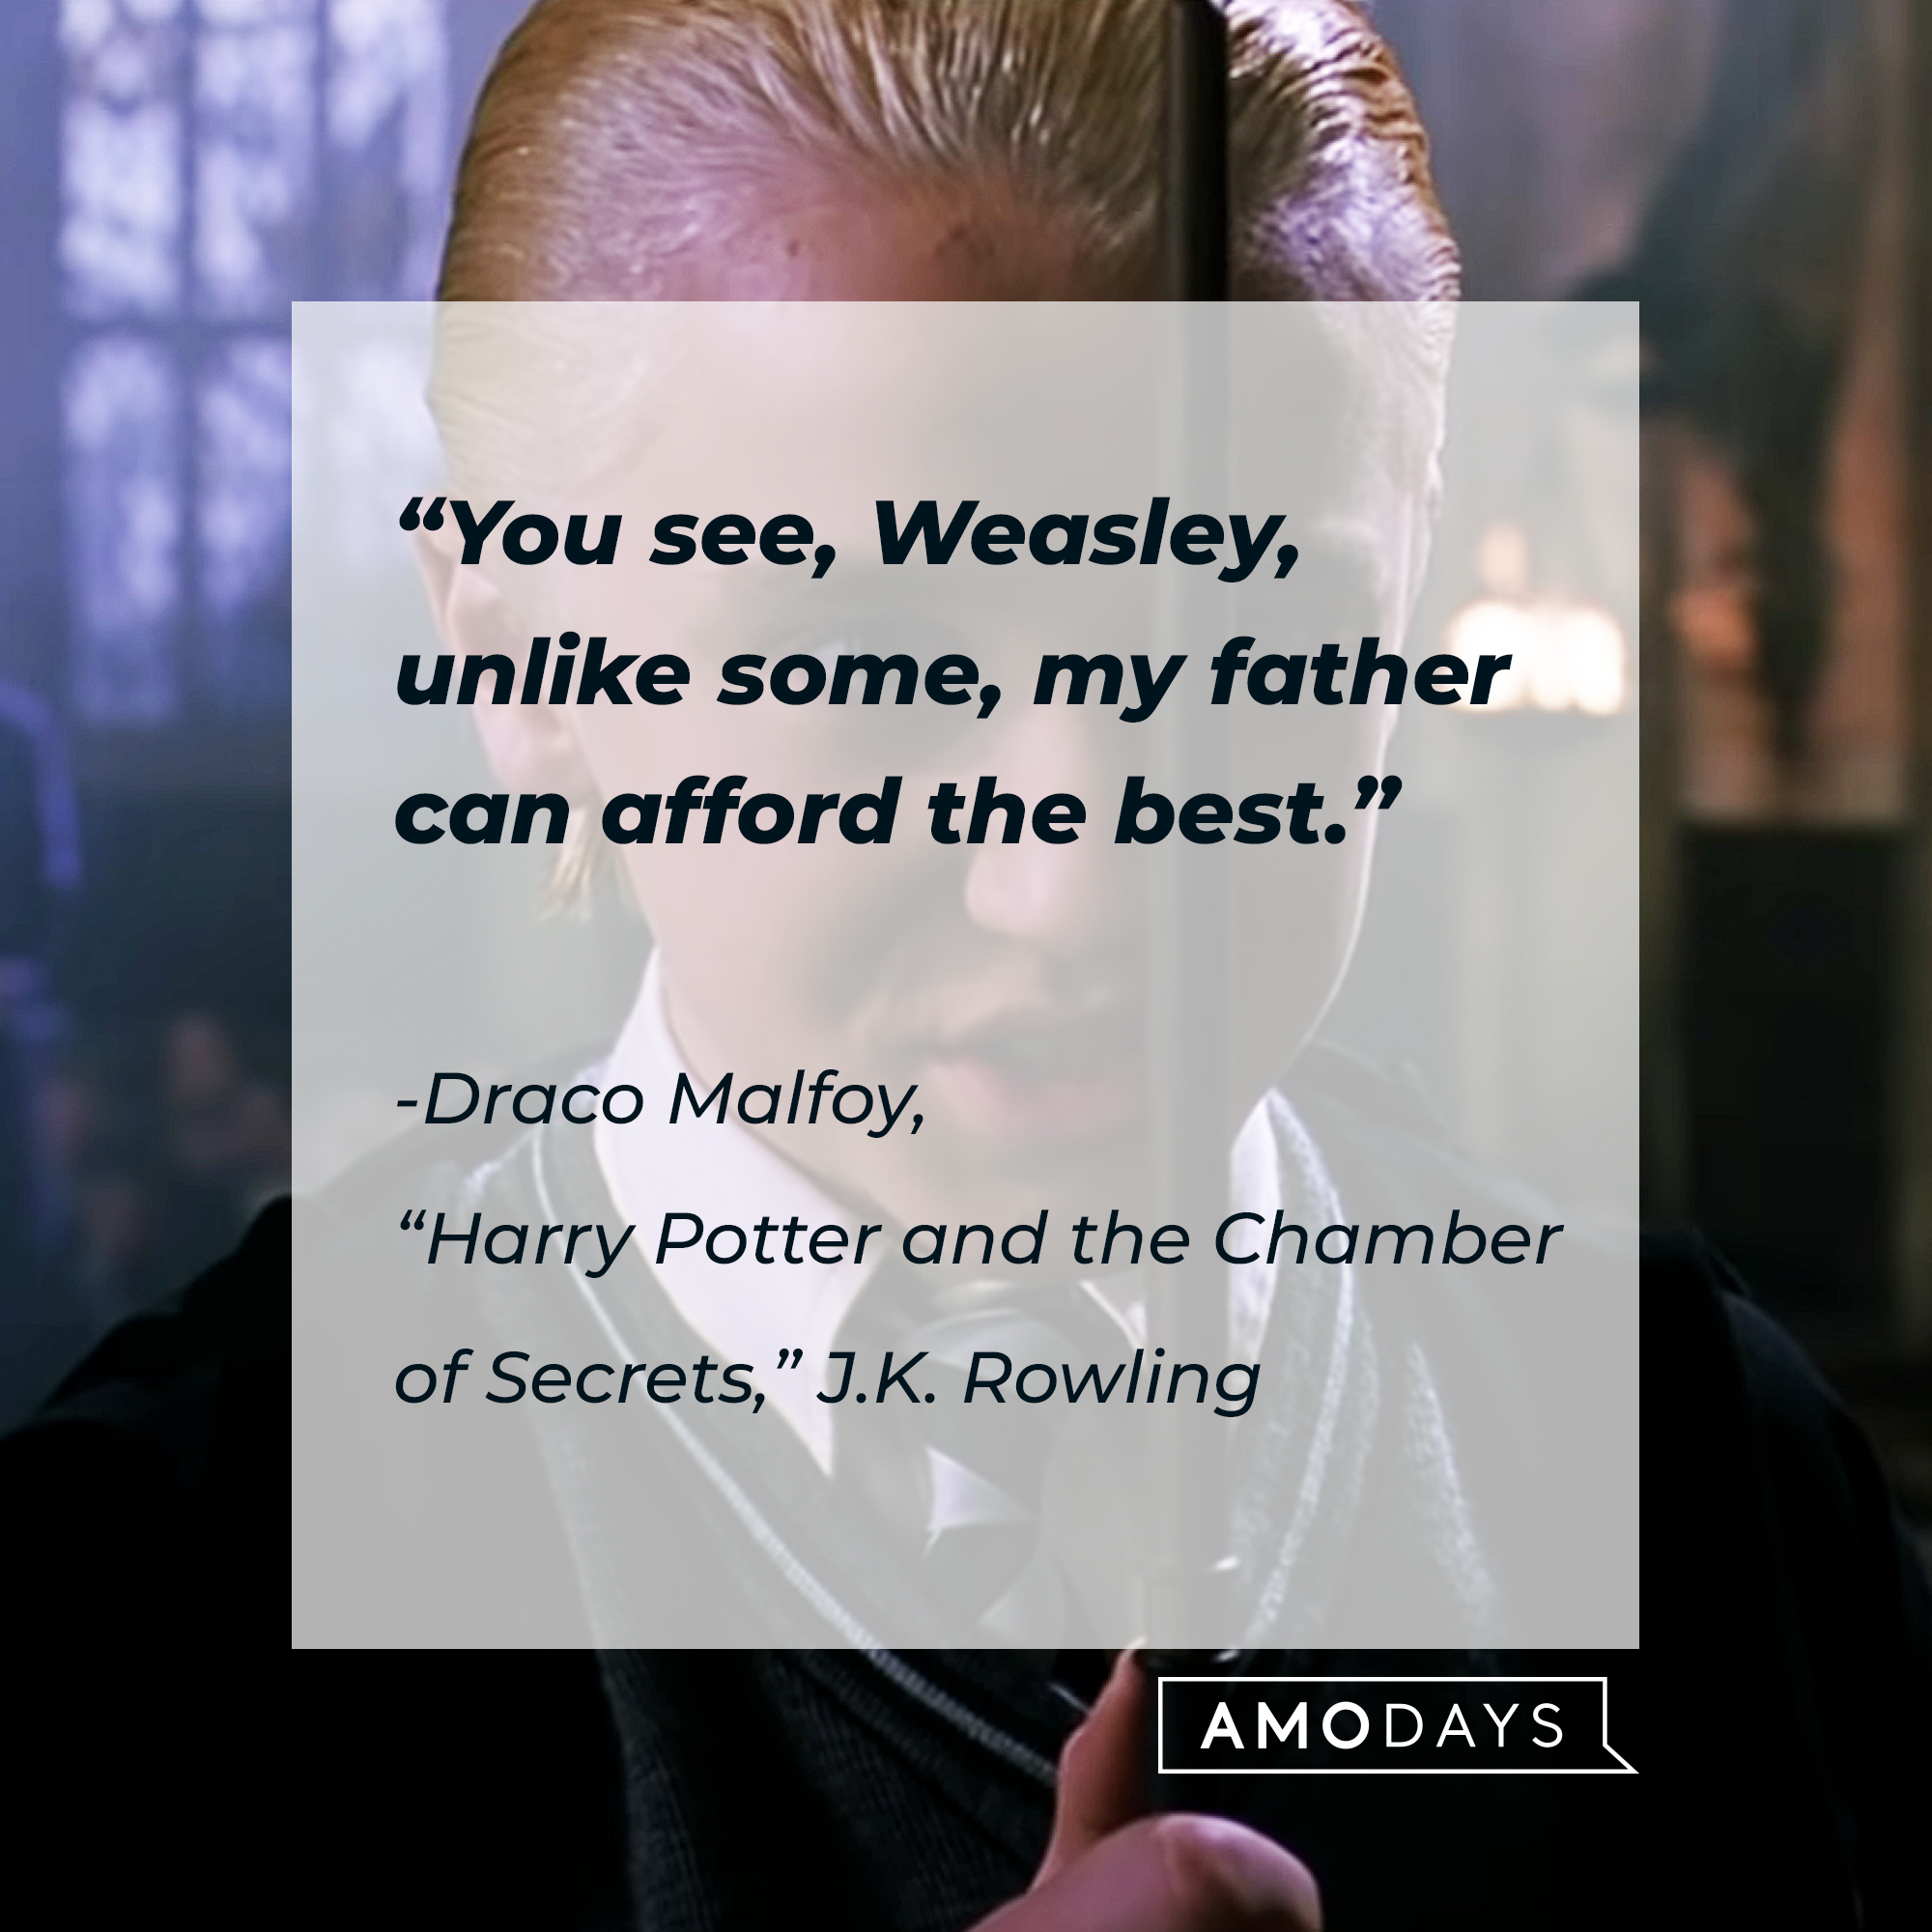 An image of Draco Malfoy with his quote: “You see, Weasley, unlike some, my father can afford the best.” | Source: Youtube.com/harrypotter